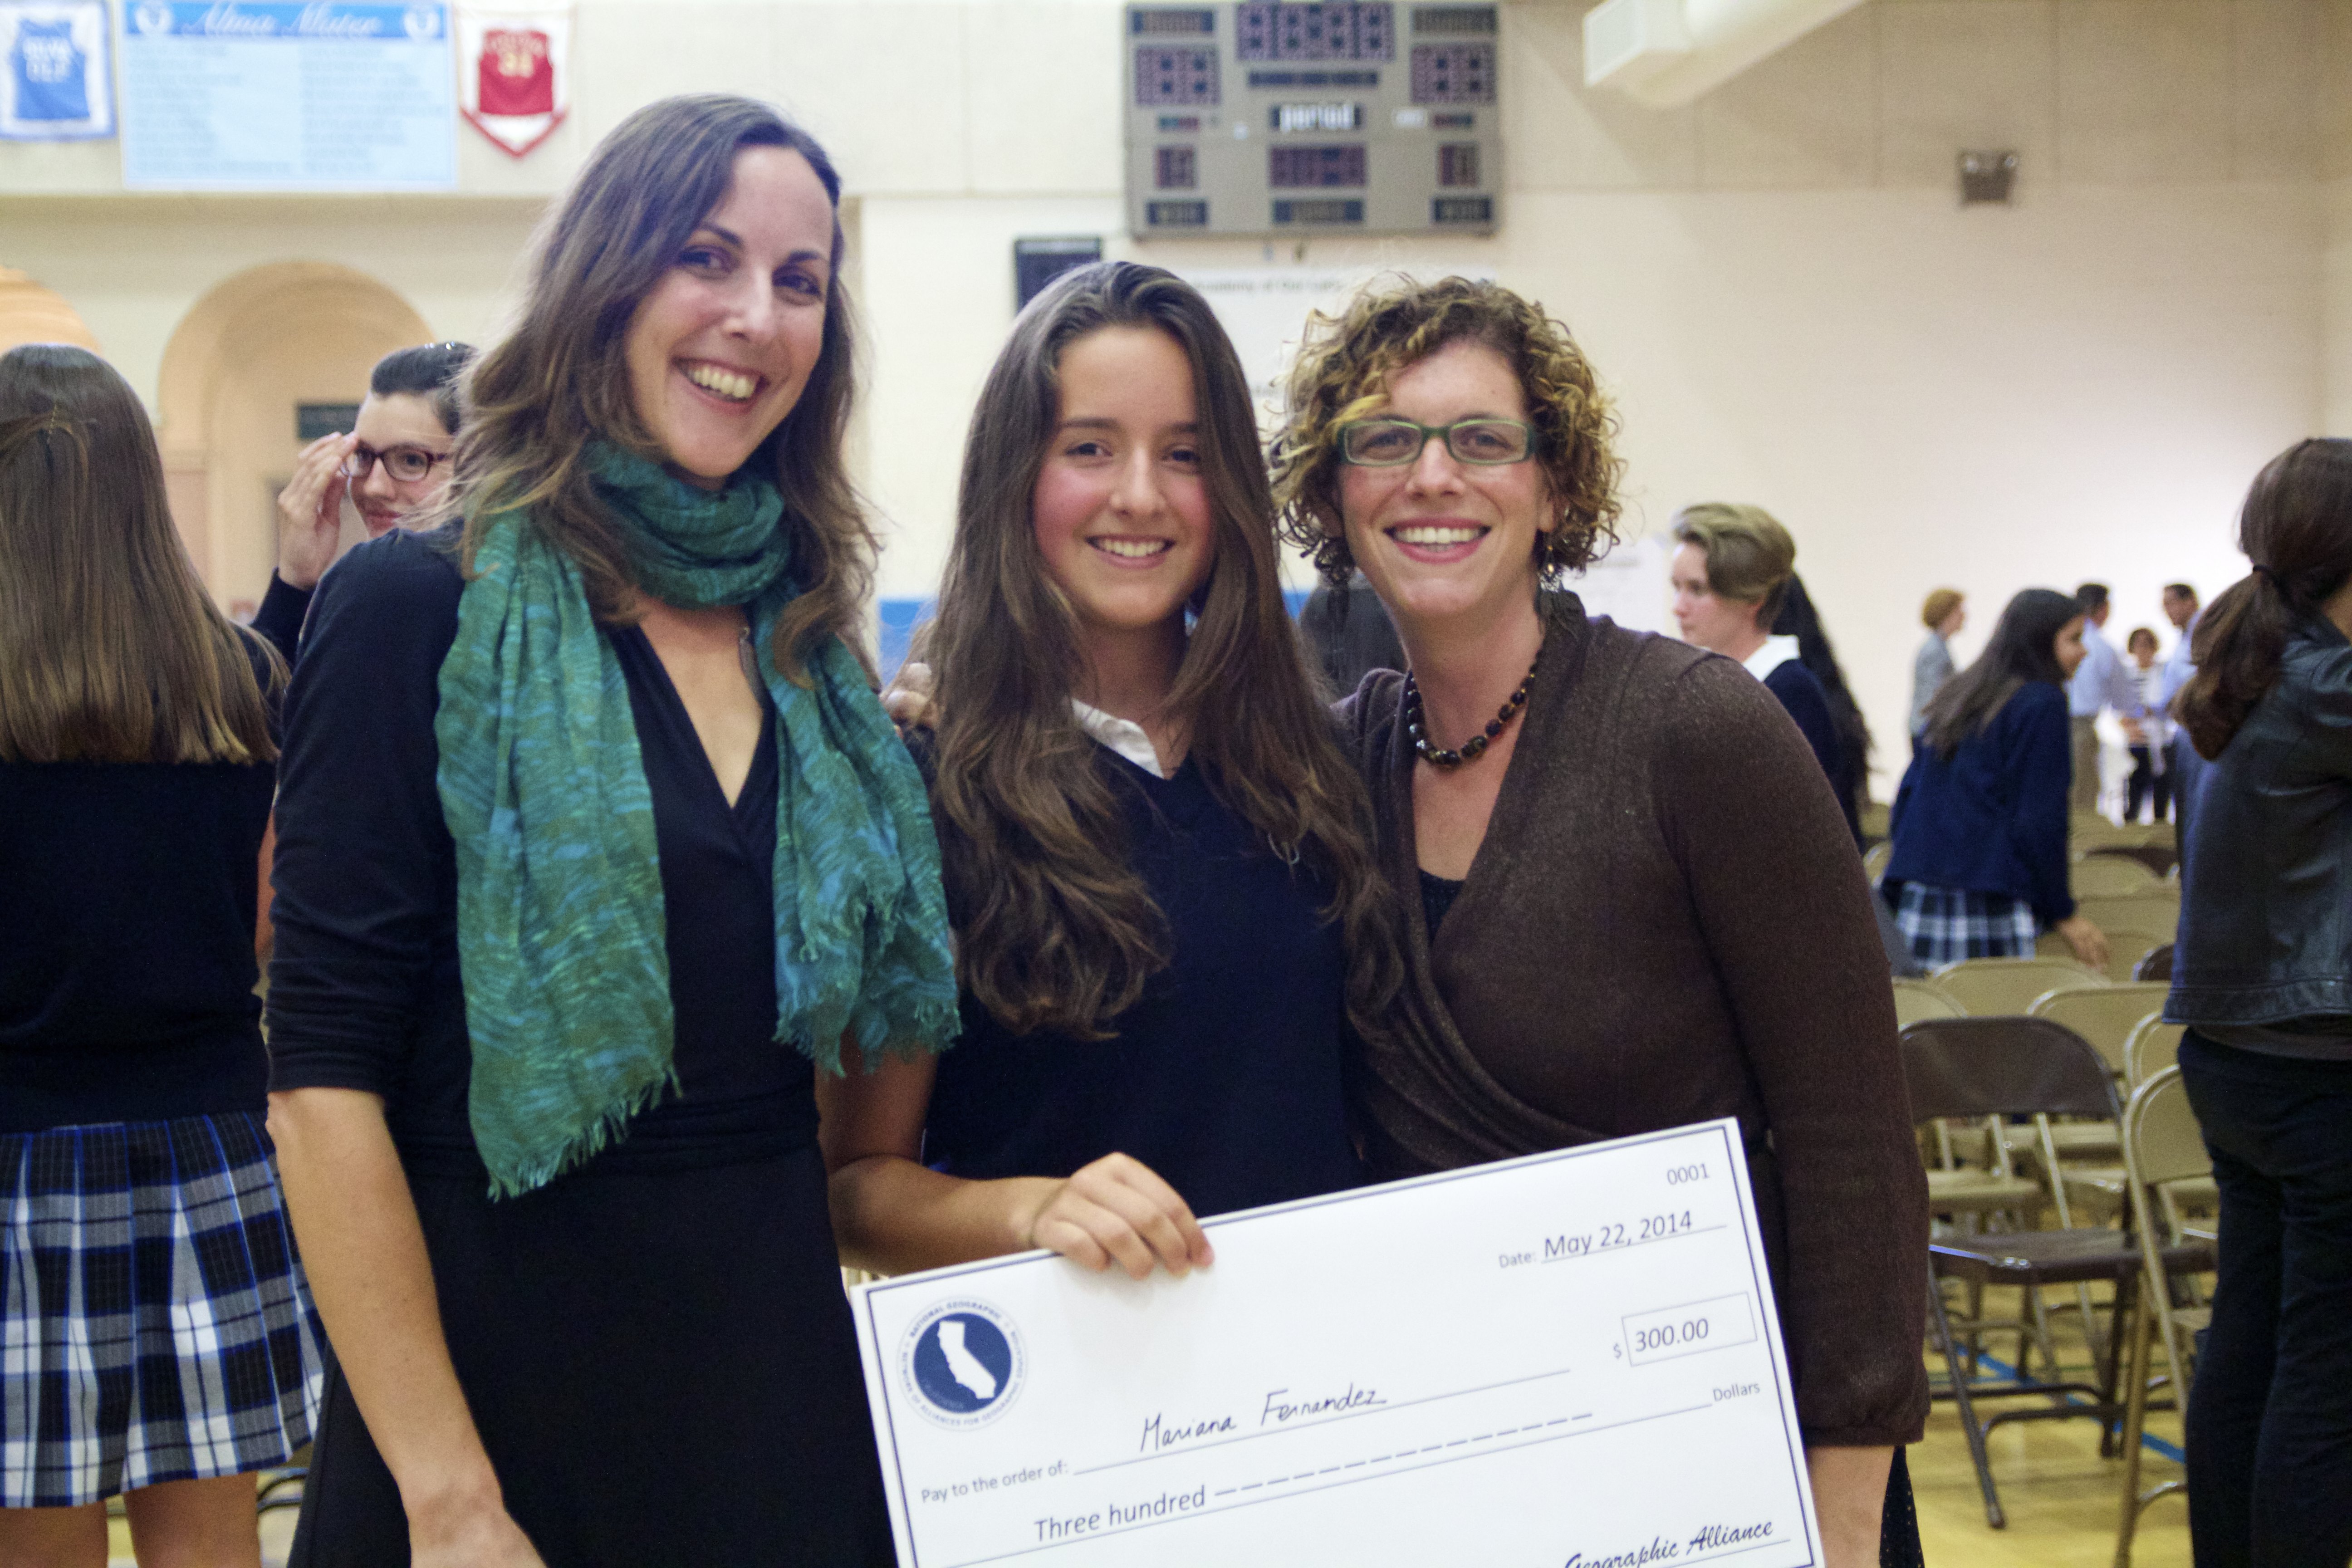 Kate Swanson, Mariana Fernandez and Katie Turner at the Academy of Our Lady of Peace Sophomore Award Ceremony in May 2014